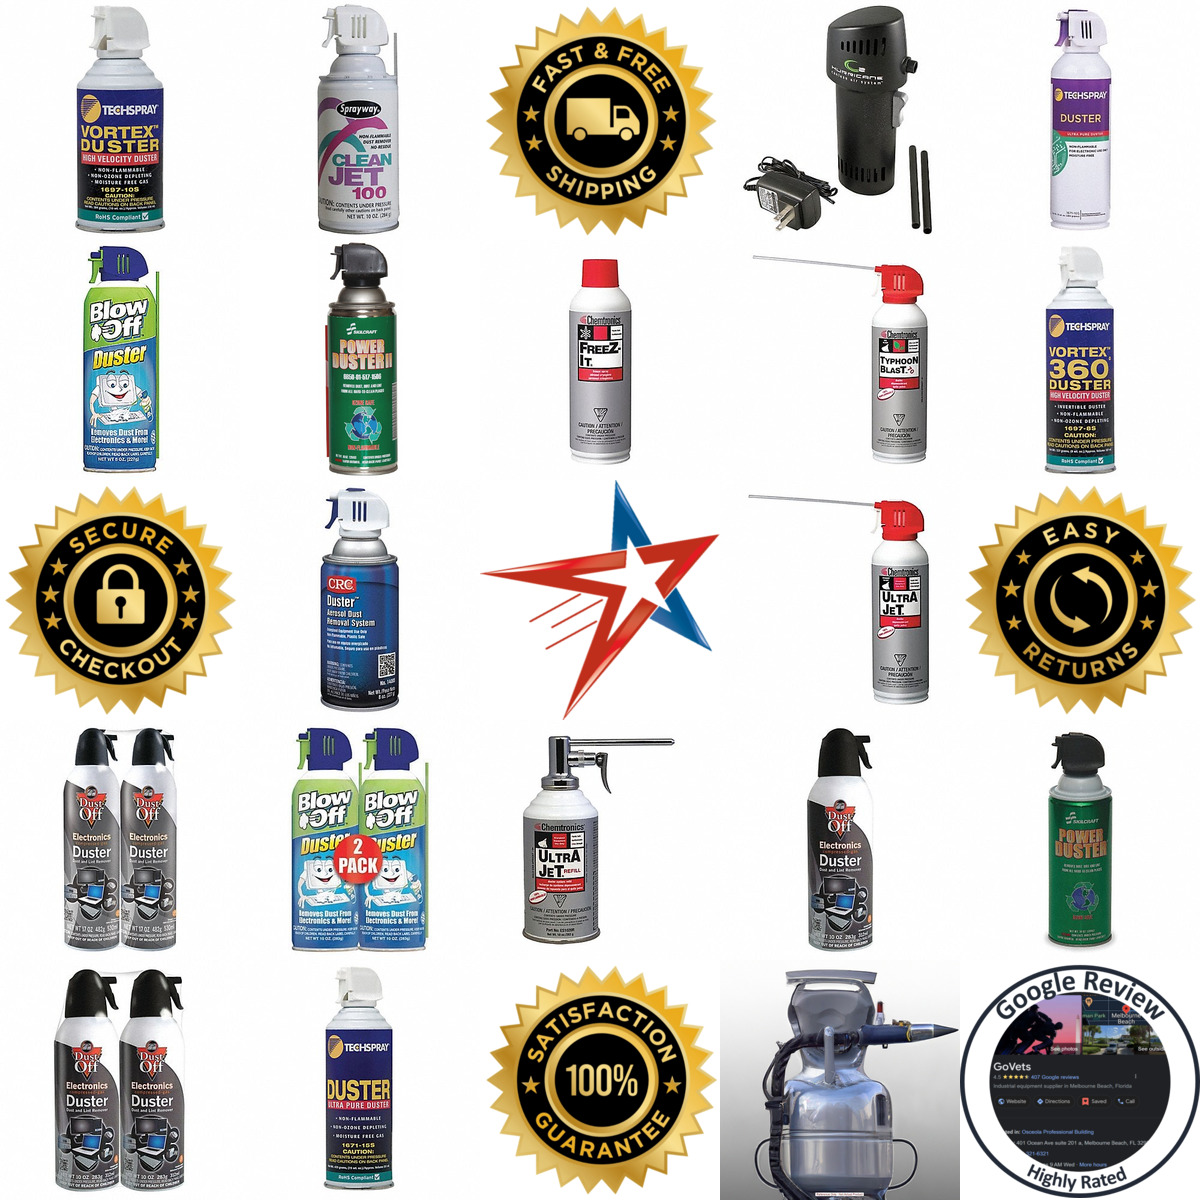 A selection of Aerosol Dusters products on GoVets